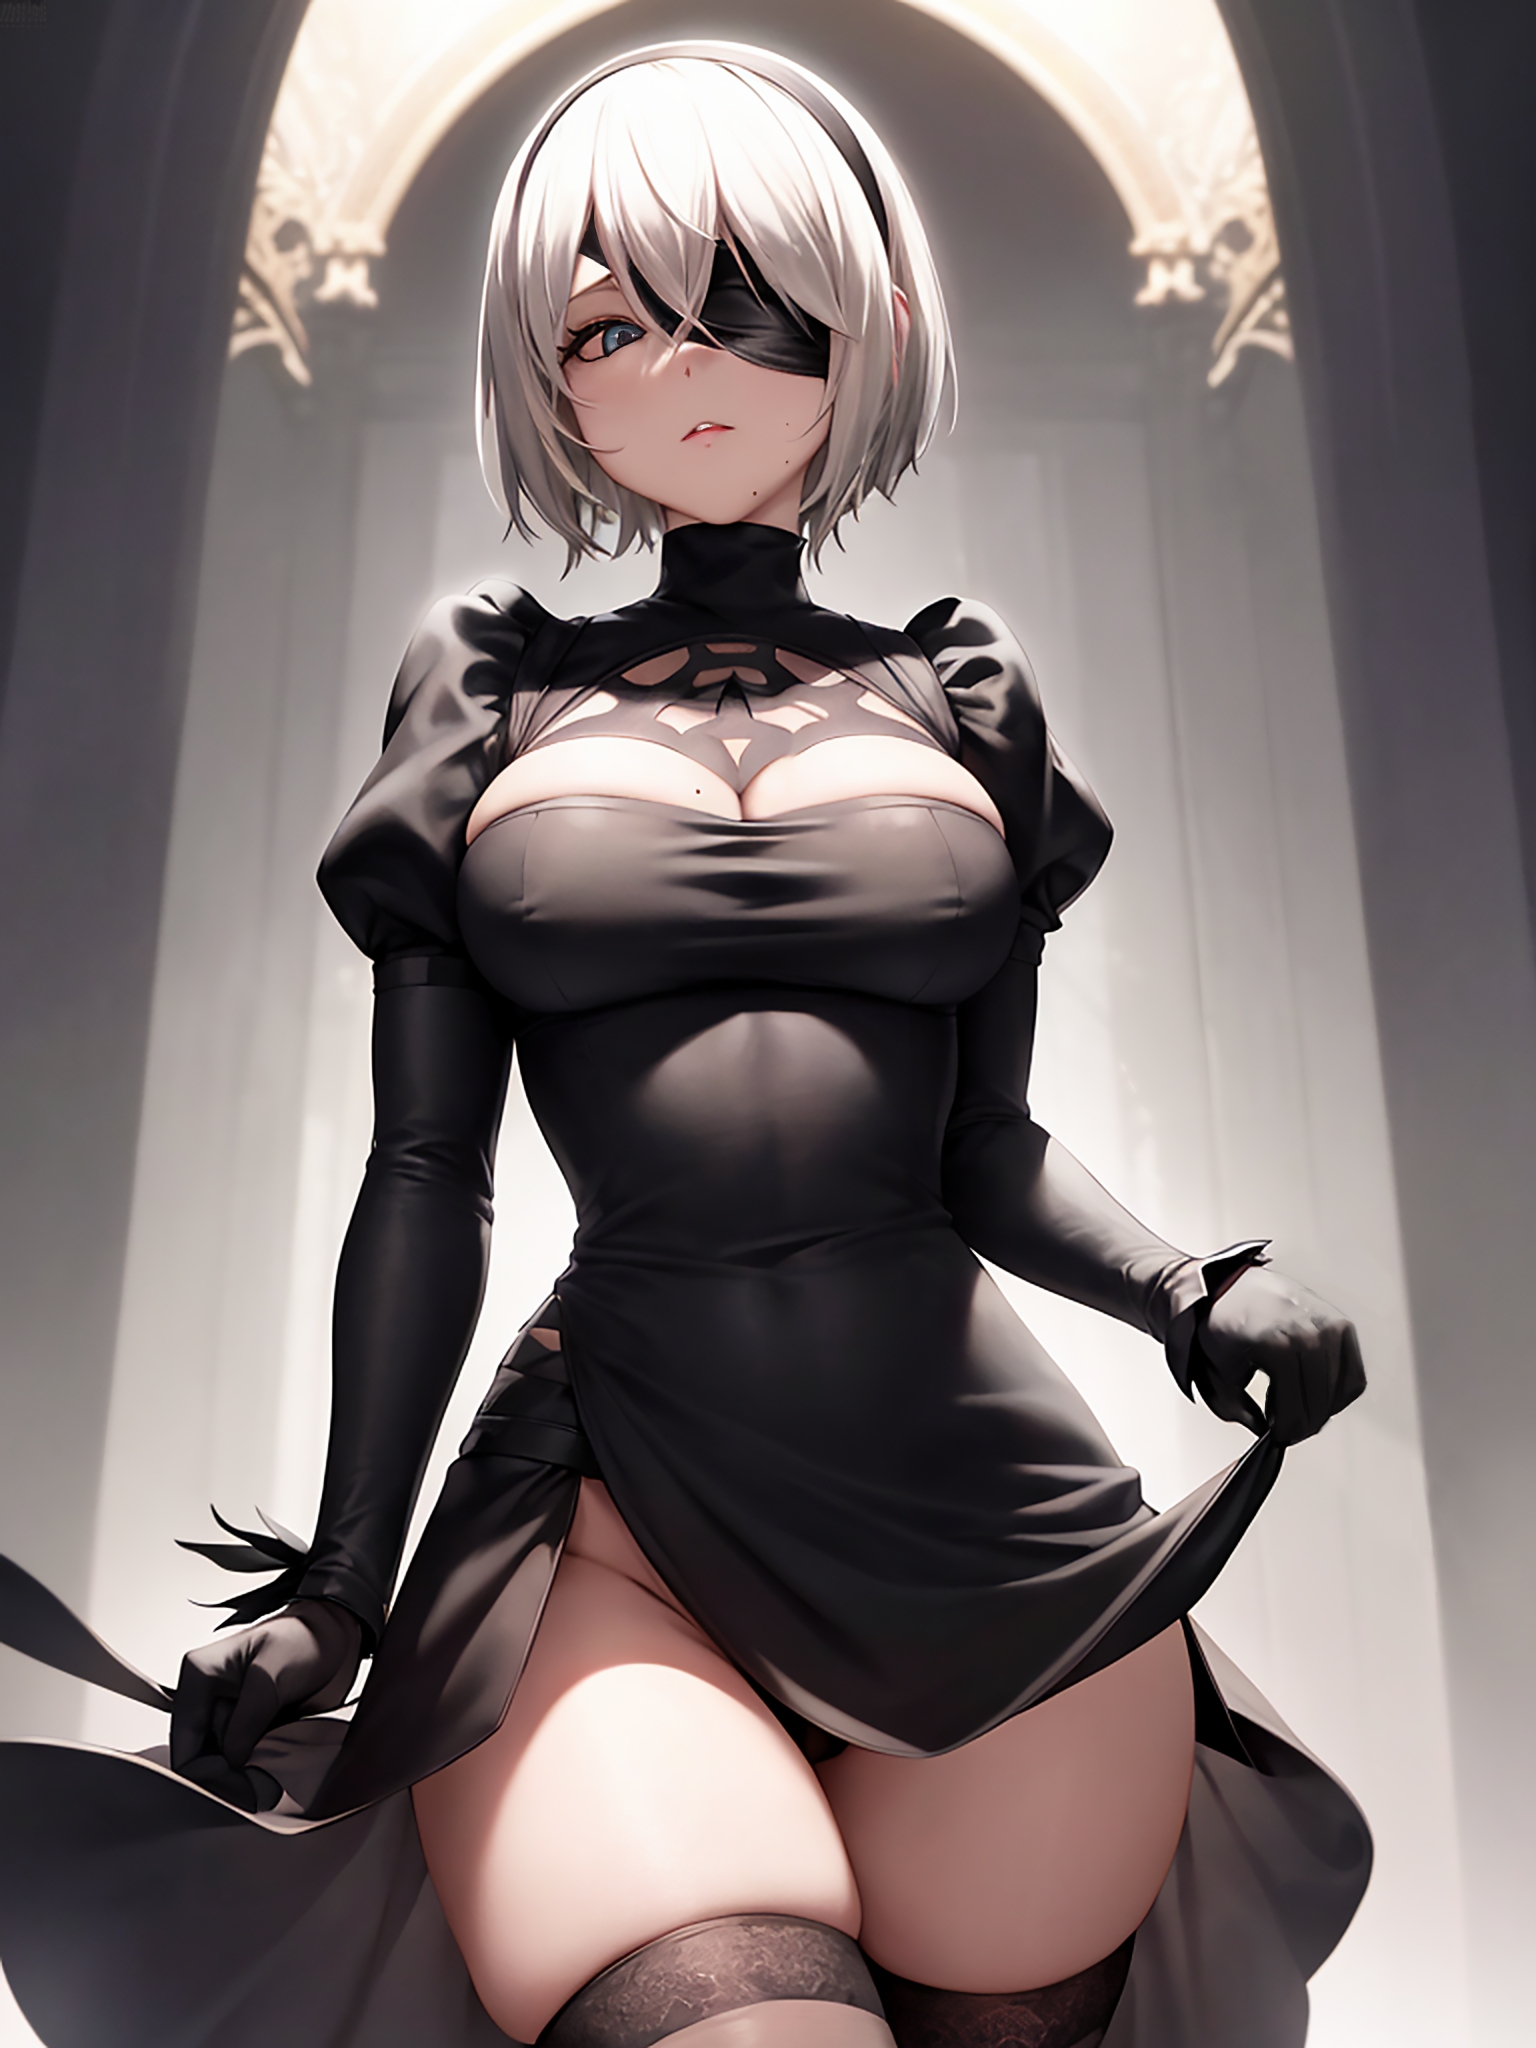 YoRHa No.2 Type B  2B  2b Yorha2b Yorha 2b Nier Automata Nier (series) Muscular Girl 3d Porn 3d Girl 3dnsfw 3dxgirls Abs Sexy Hot Bimbo Huge Boobs Huge Tits Muscles Musclegirl Pinup Perfect Body Fuck Hard Sexyhot Sexy Ass Sexy Woman Fake Tits Lips Latex Flexible Smirking Big Tits Huge Ass Big Booty Booty Fit Fitness Thicc Mom Milf Mature Mature Woman Spread Legs Spread Thick Thighs Horny Face Short Hair Hardcore Curvy Big Ass Big boobs Big Breasts Big Butt Brown Eyes Cleavage Fishnet Stockings Fishnet Nipple Piercing Piercing Belly Button Piercing Leather Jacket Thighs Jewels Pawg Ass Red head Tribal Weapon Armor Nude Boobs Pregnant Big Balls Big Nipples Lingerie Sexy Lingerie Womb Tattoo Face Tattoo Slut Whore Bitch Comic Hotpants Shorts Long Hair Smile Blonde Graffiti Splash Body Paint Paint Squatting Japanese Korean Asian Priestess Nun 2